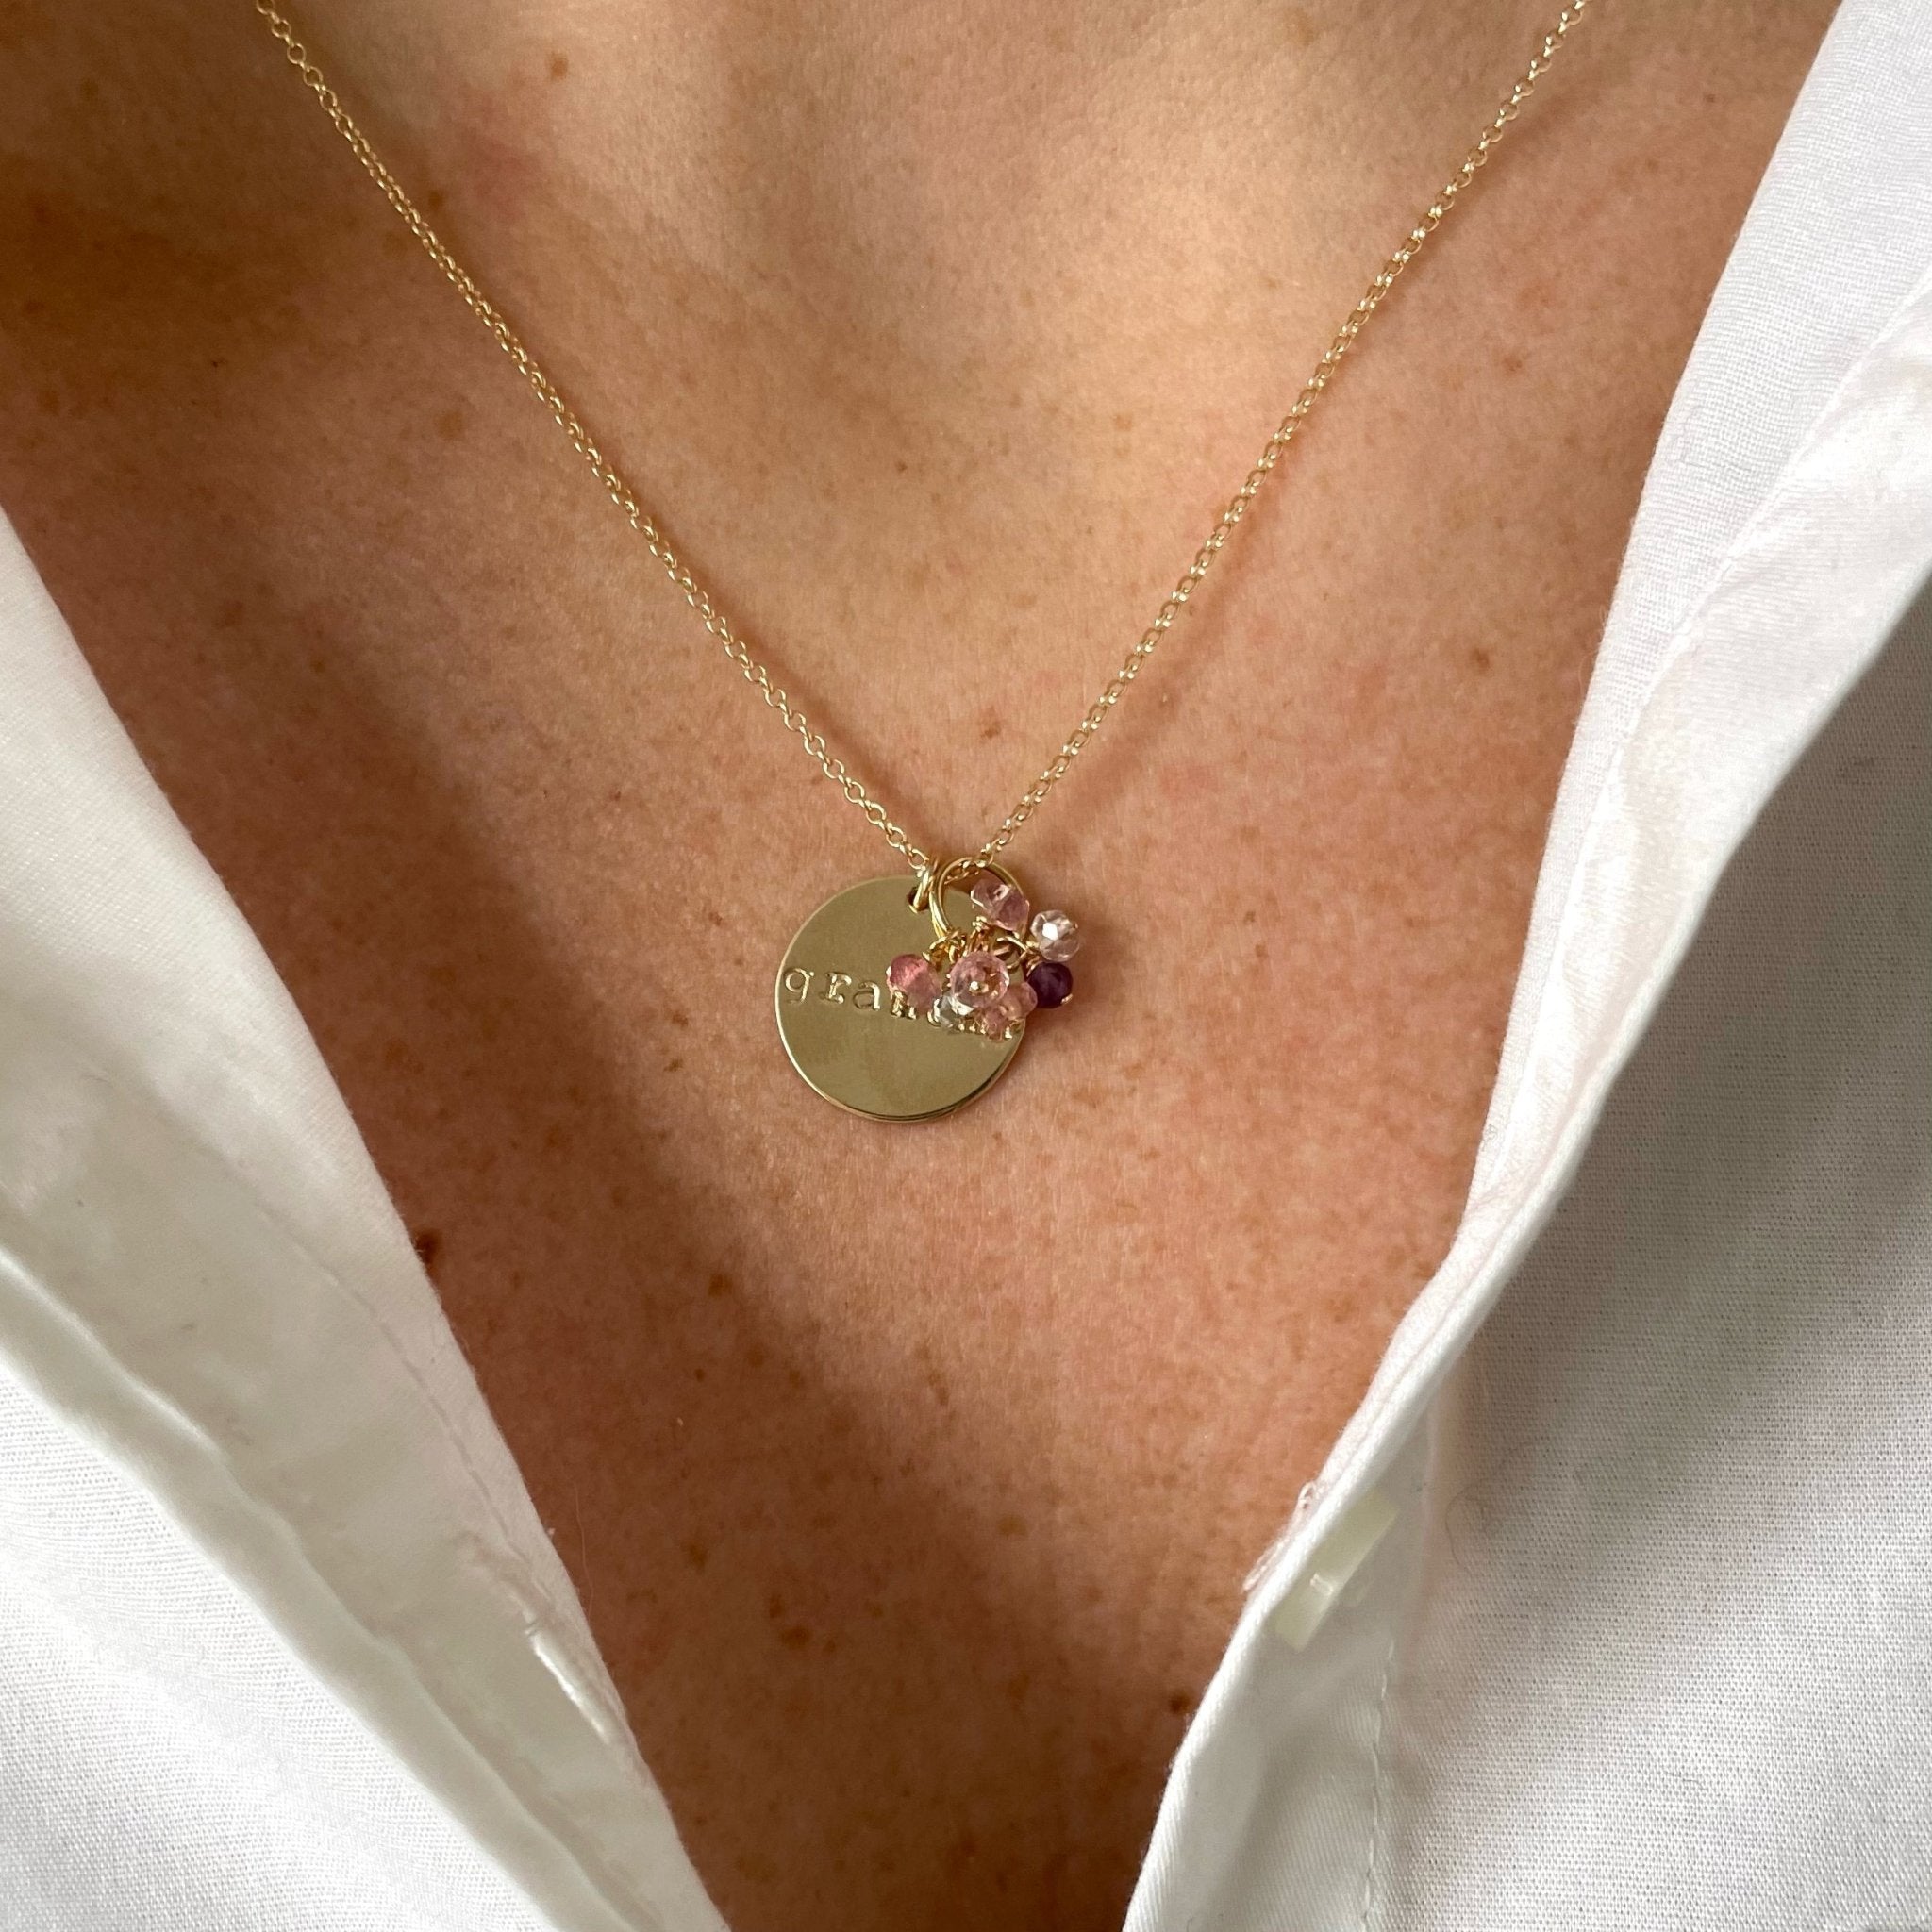 Woman's neckline wearing white button down with gold grandma disc and wire wrapped gemstone necklace with 7 pink, white, light blue and purple gemstones. Gigi Necklace by Sarah Cornwell Jewelry